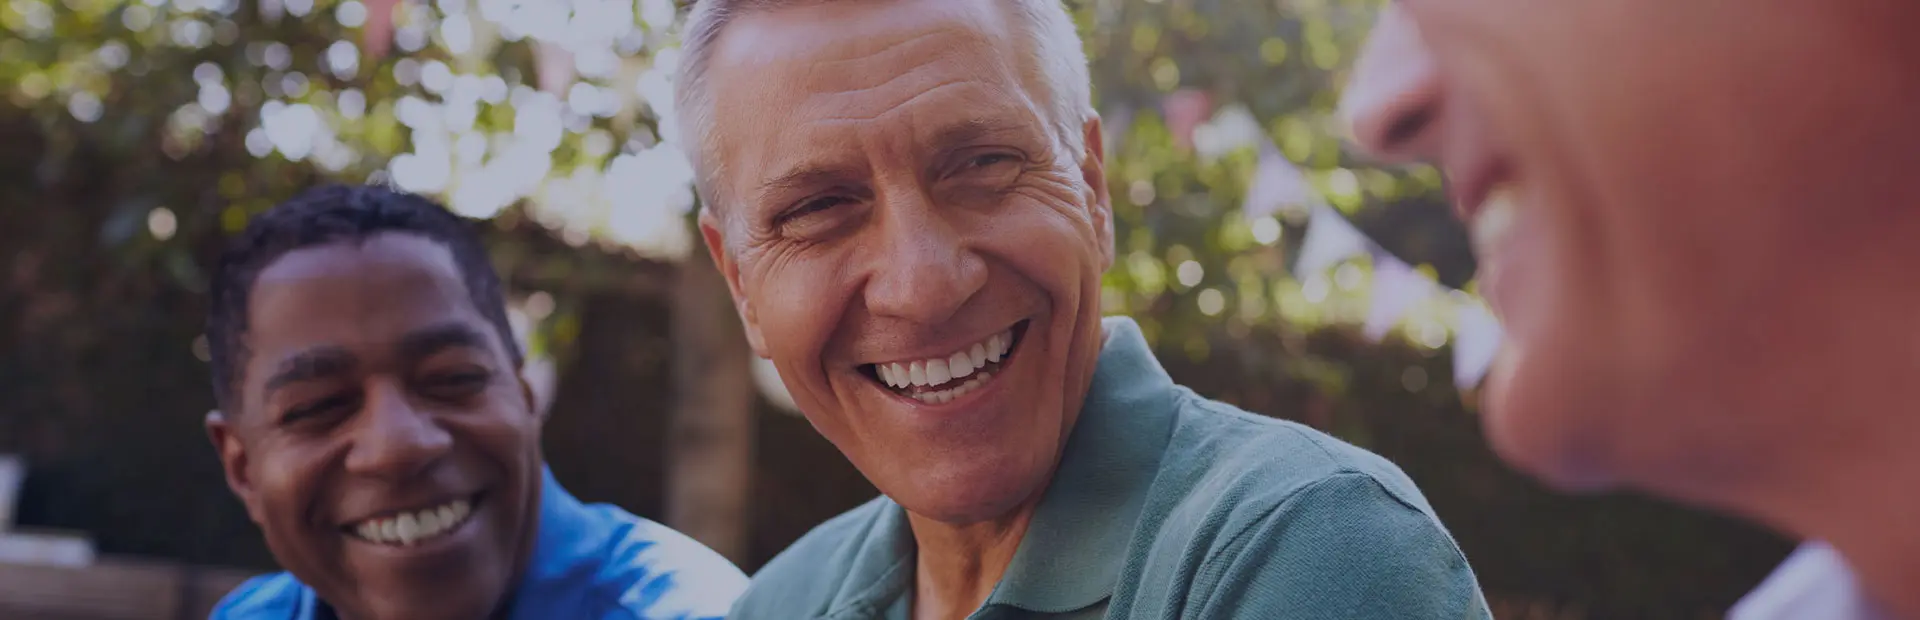 A group of male friends in their fifties are smiling in a garden, as they discuss getting used to full or partial dentures.